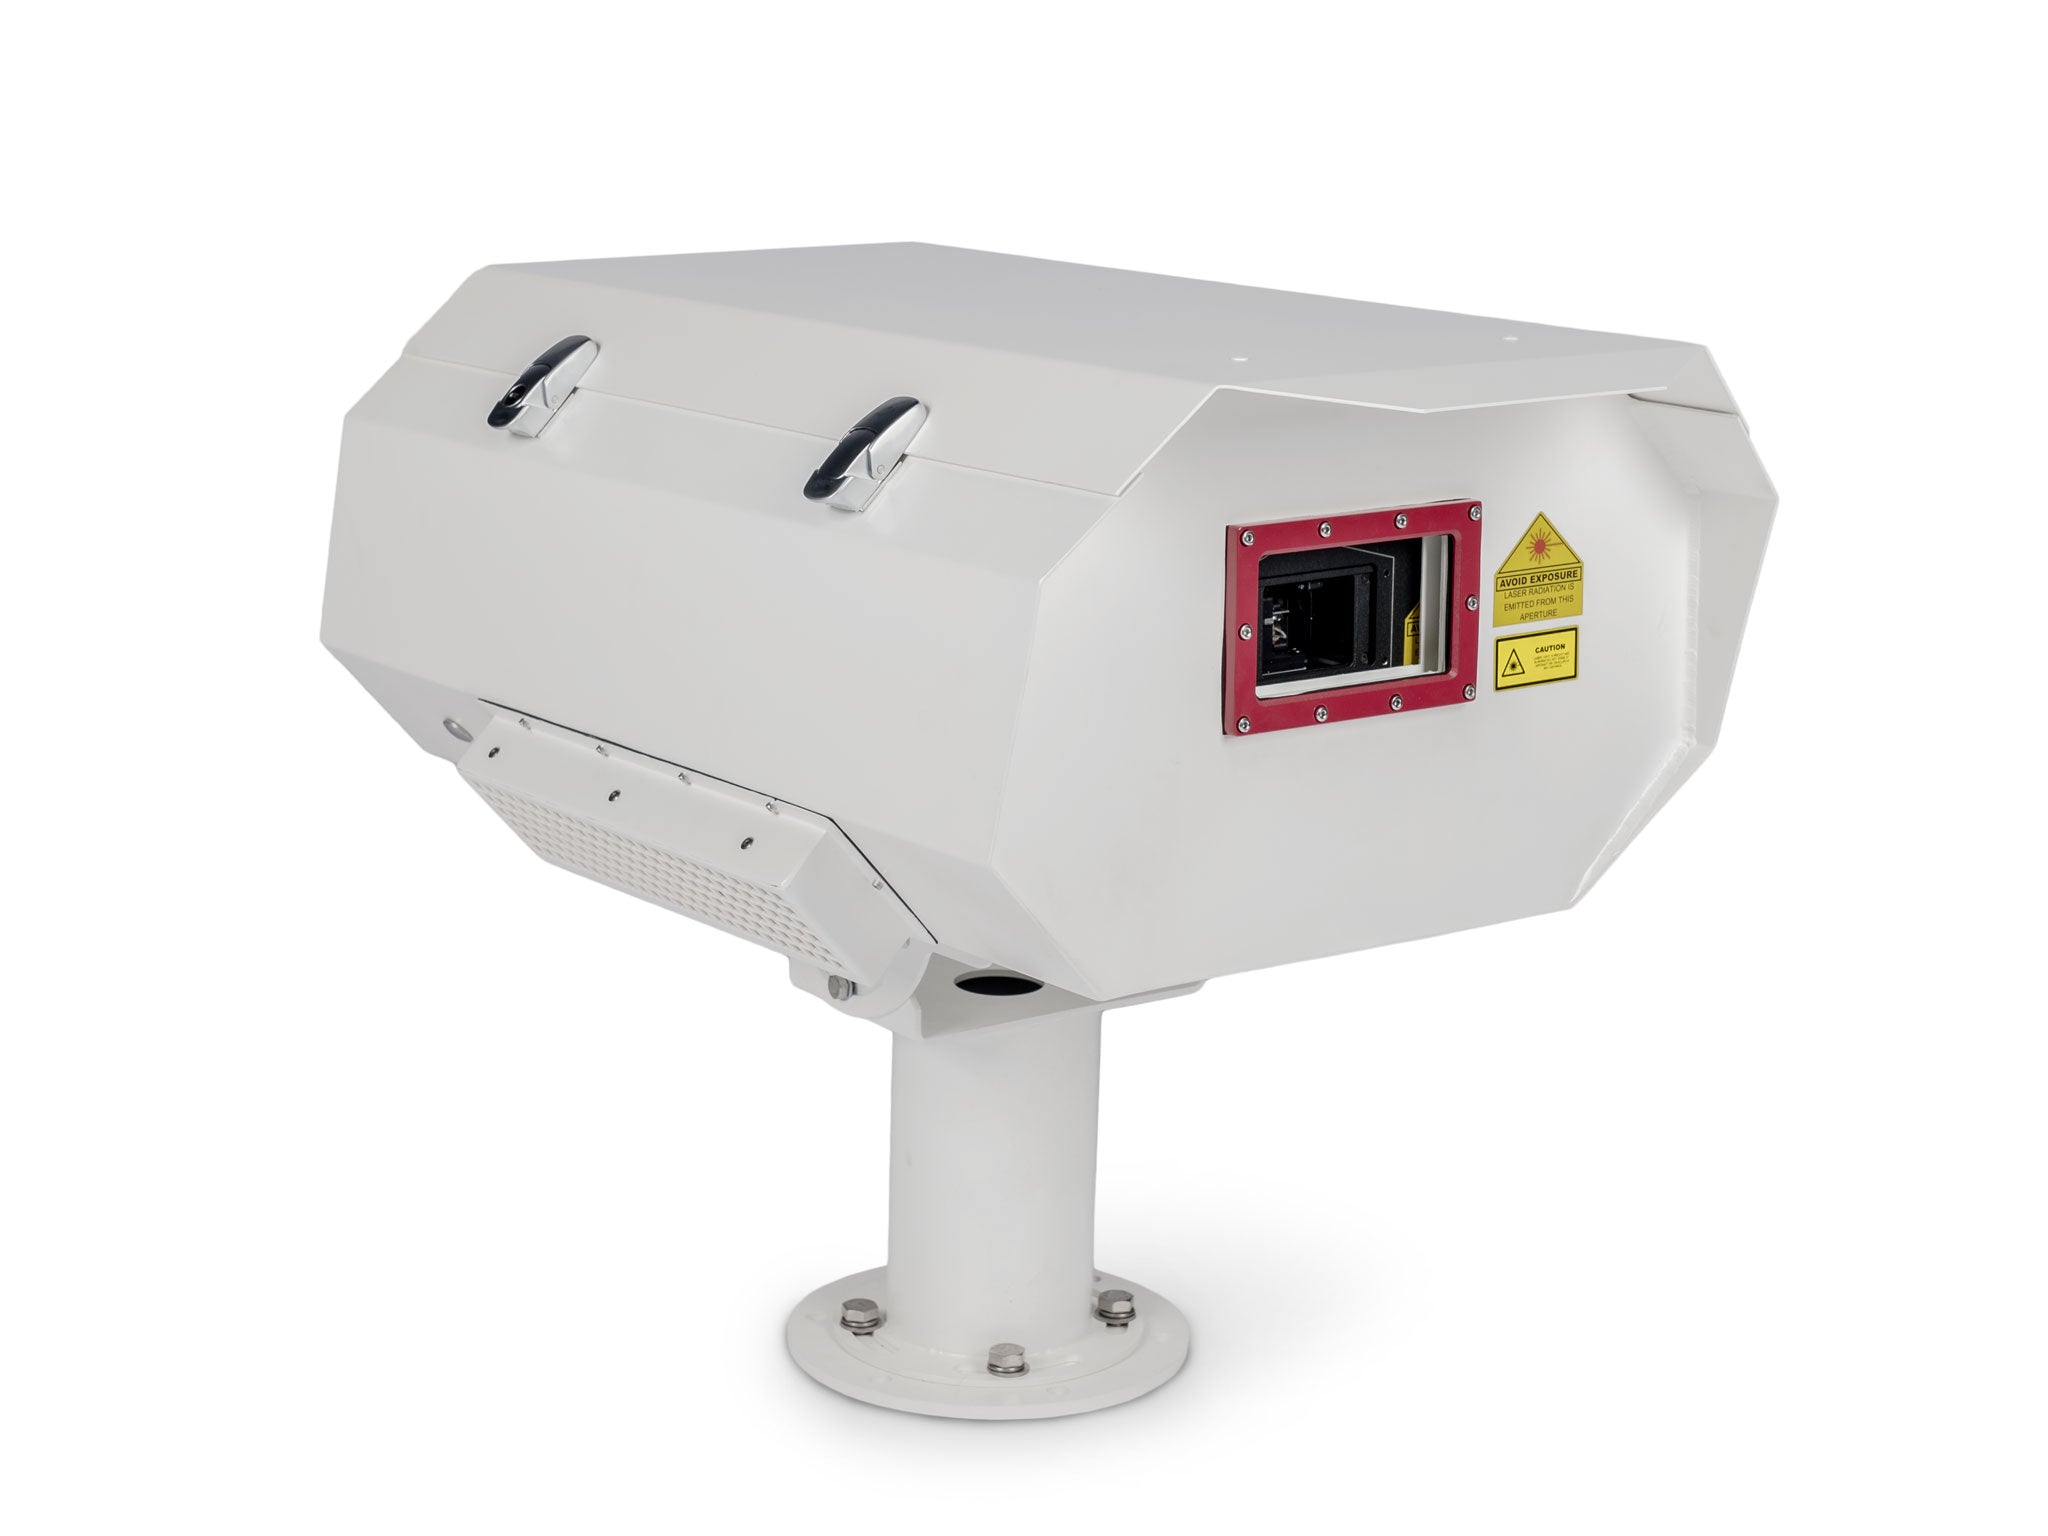 Outdoor IP65 Monsoon enclosure/housing for protection of lasers and delicate equipment in harsh weather_1